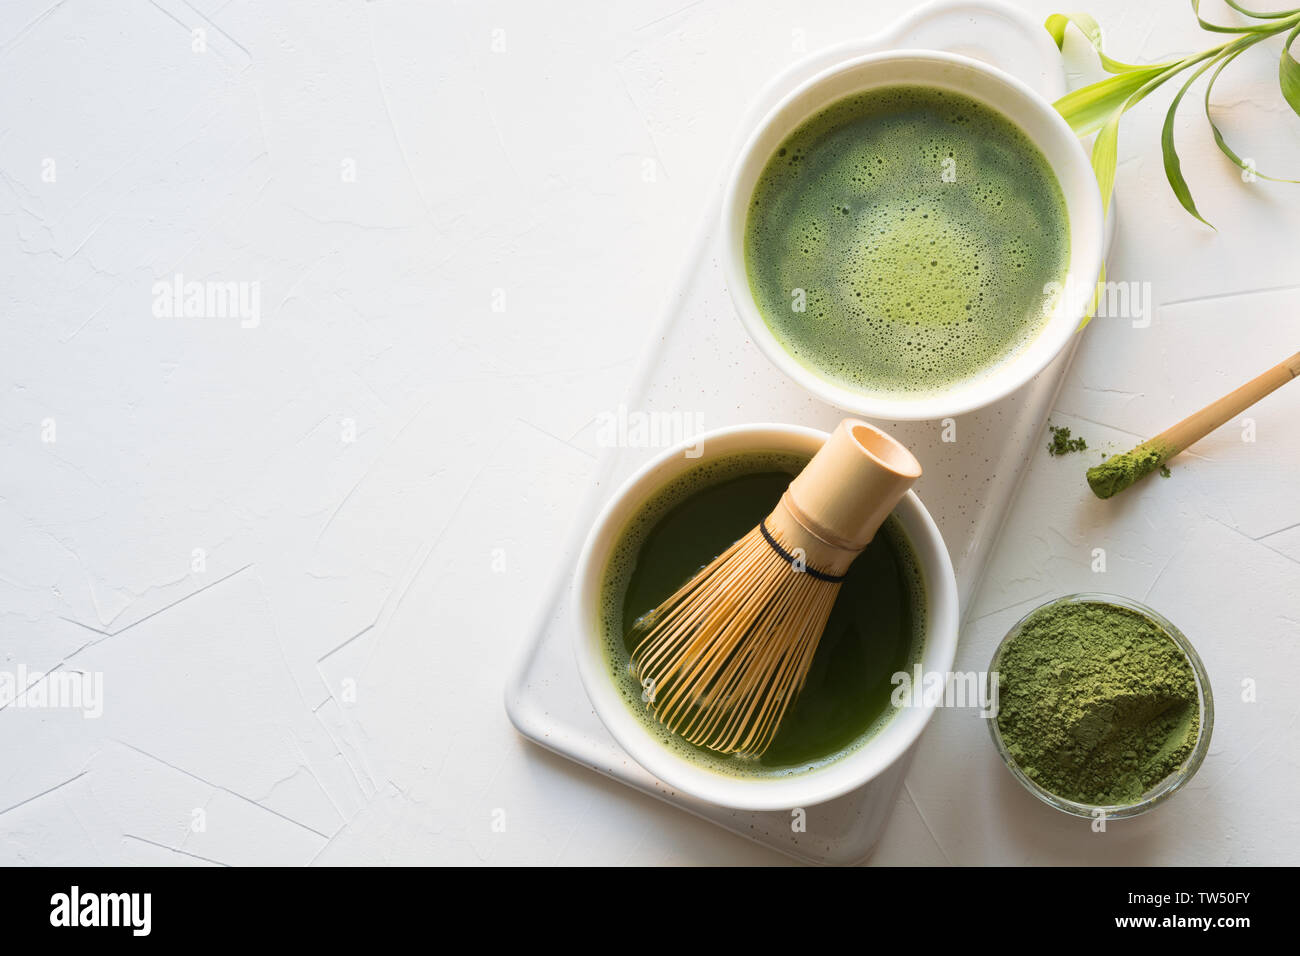 Ceremony traditional green matcha tea in bowl and bamboo whisk on white concrete table. Top view. Space for text. Stock Photo